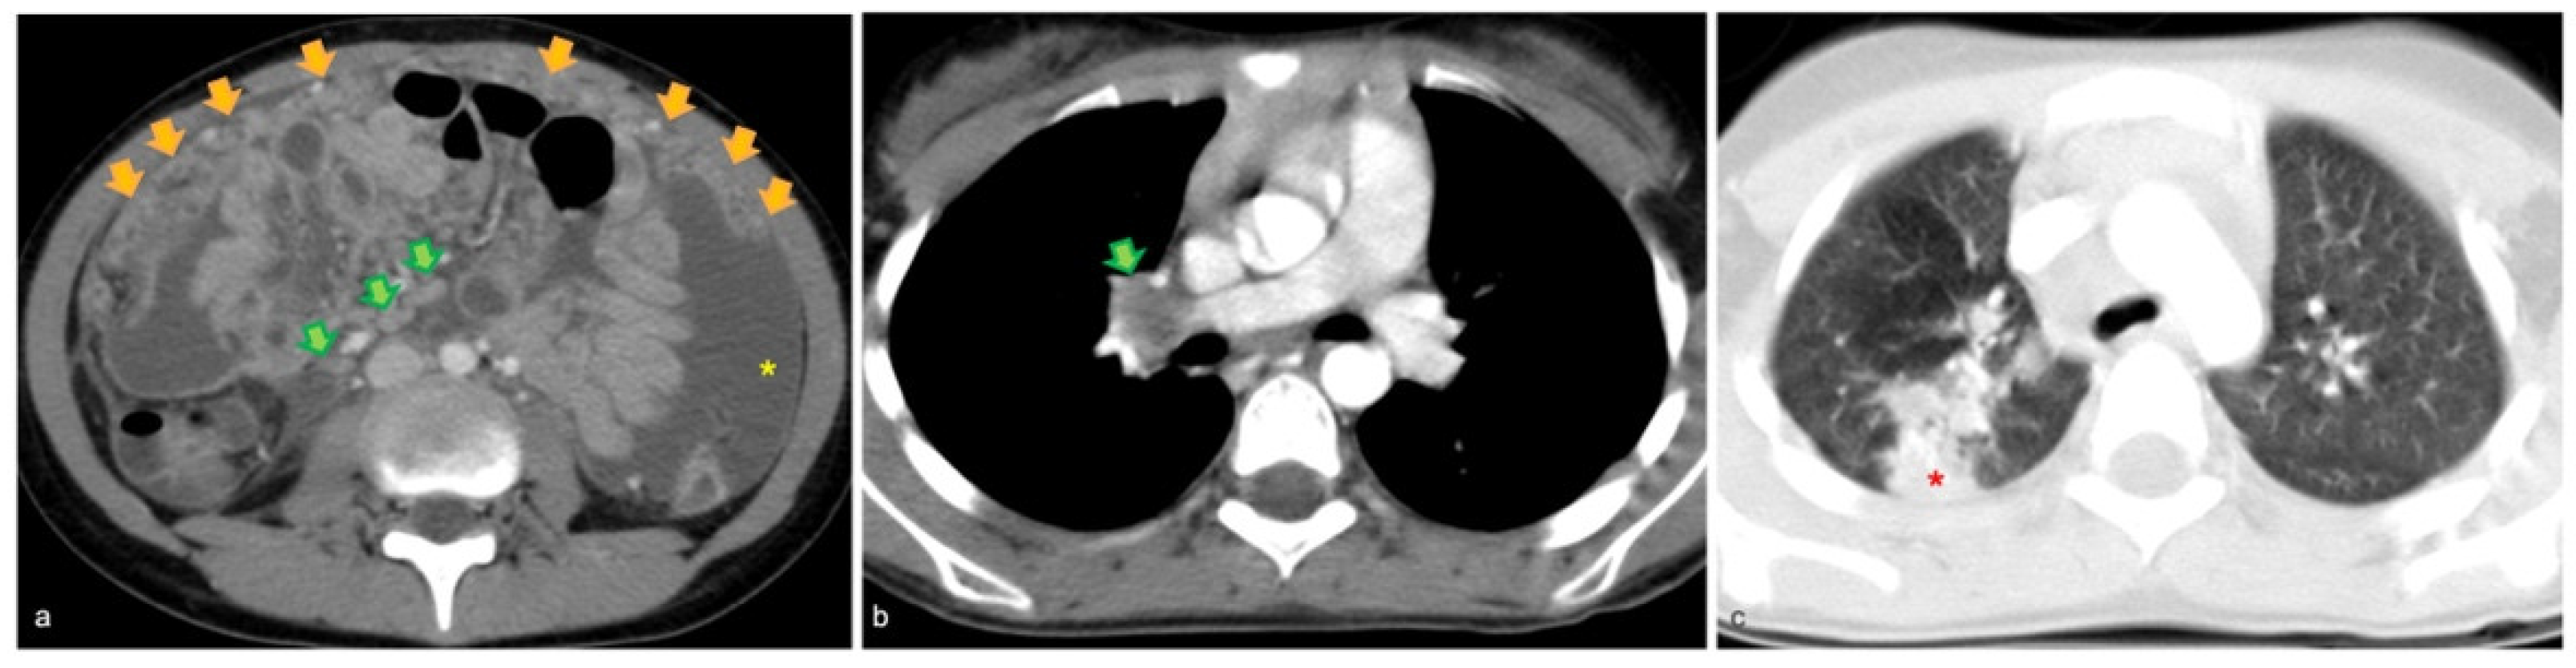 Omental cakes: unusual aetiologies and CT appearances | Insights into  Imaging | Full Text